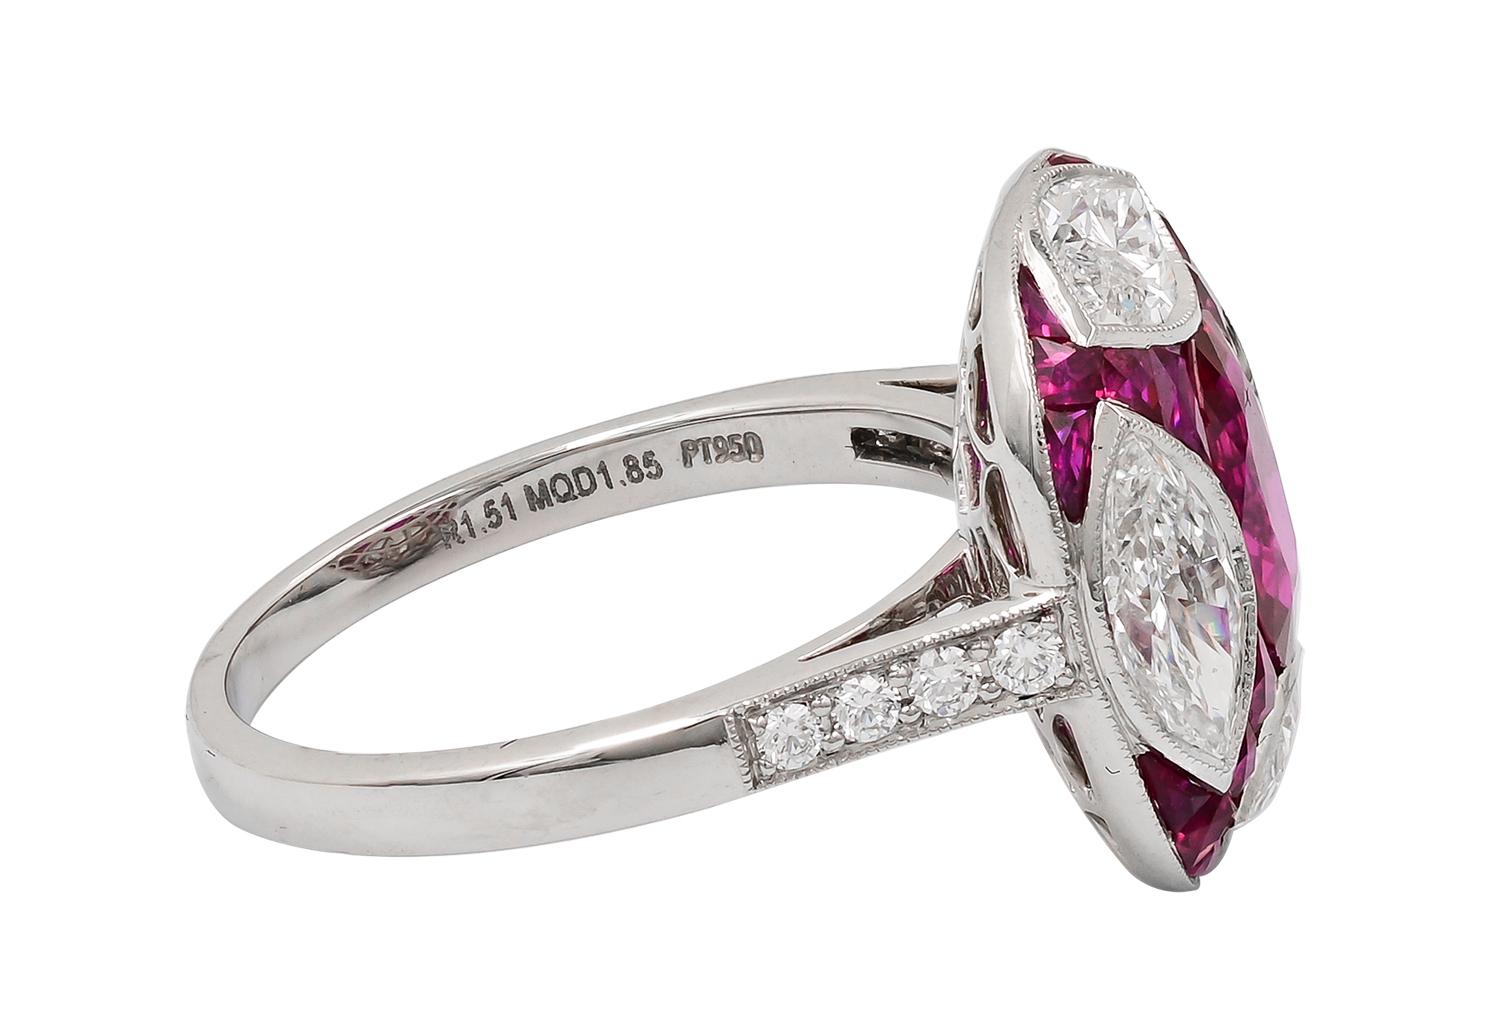 Marquise Cut Sophia D, 1.51 Carat Ruby and Diamond Art Deco Style Ring in Platinum For Sale